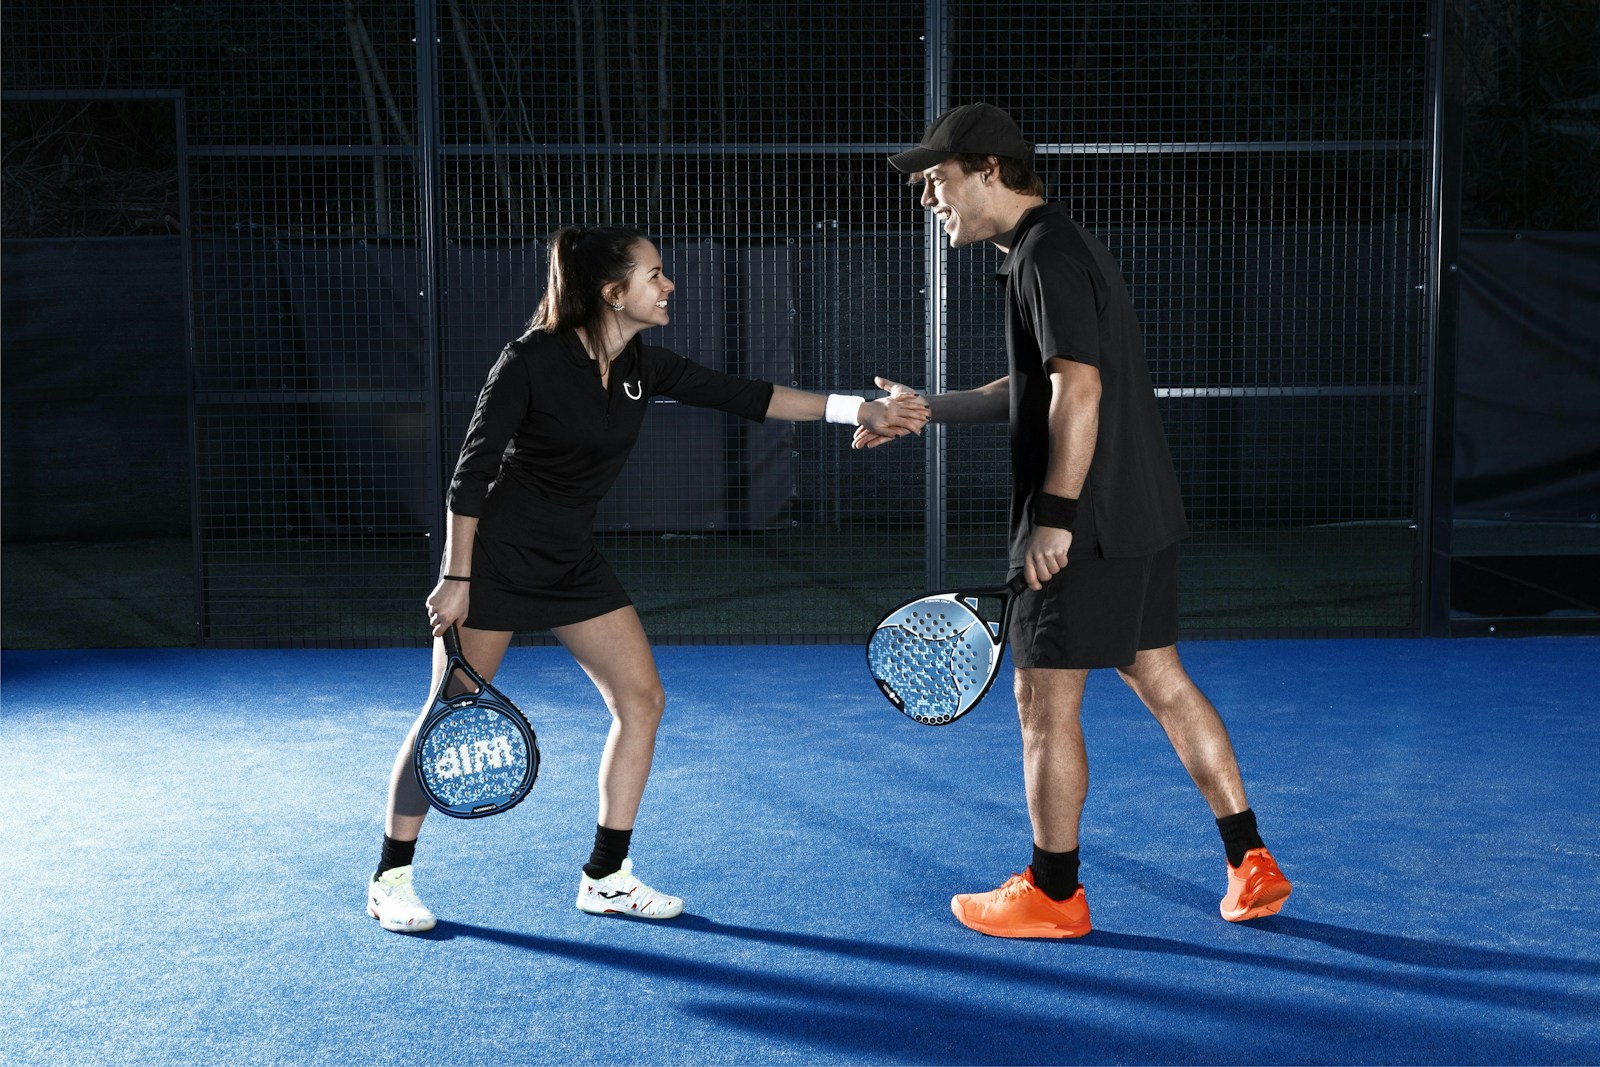 a man and woman shaking hands on a tennis court